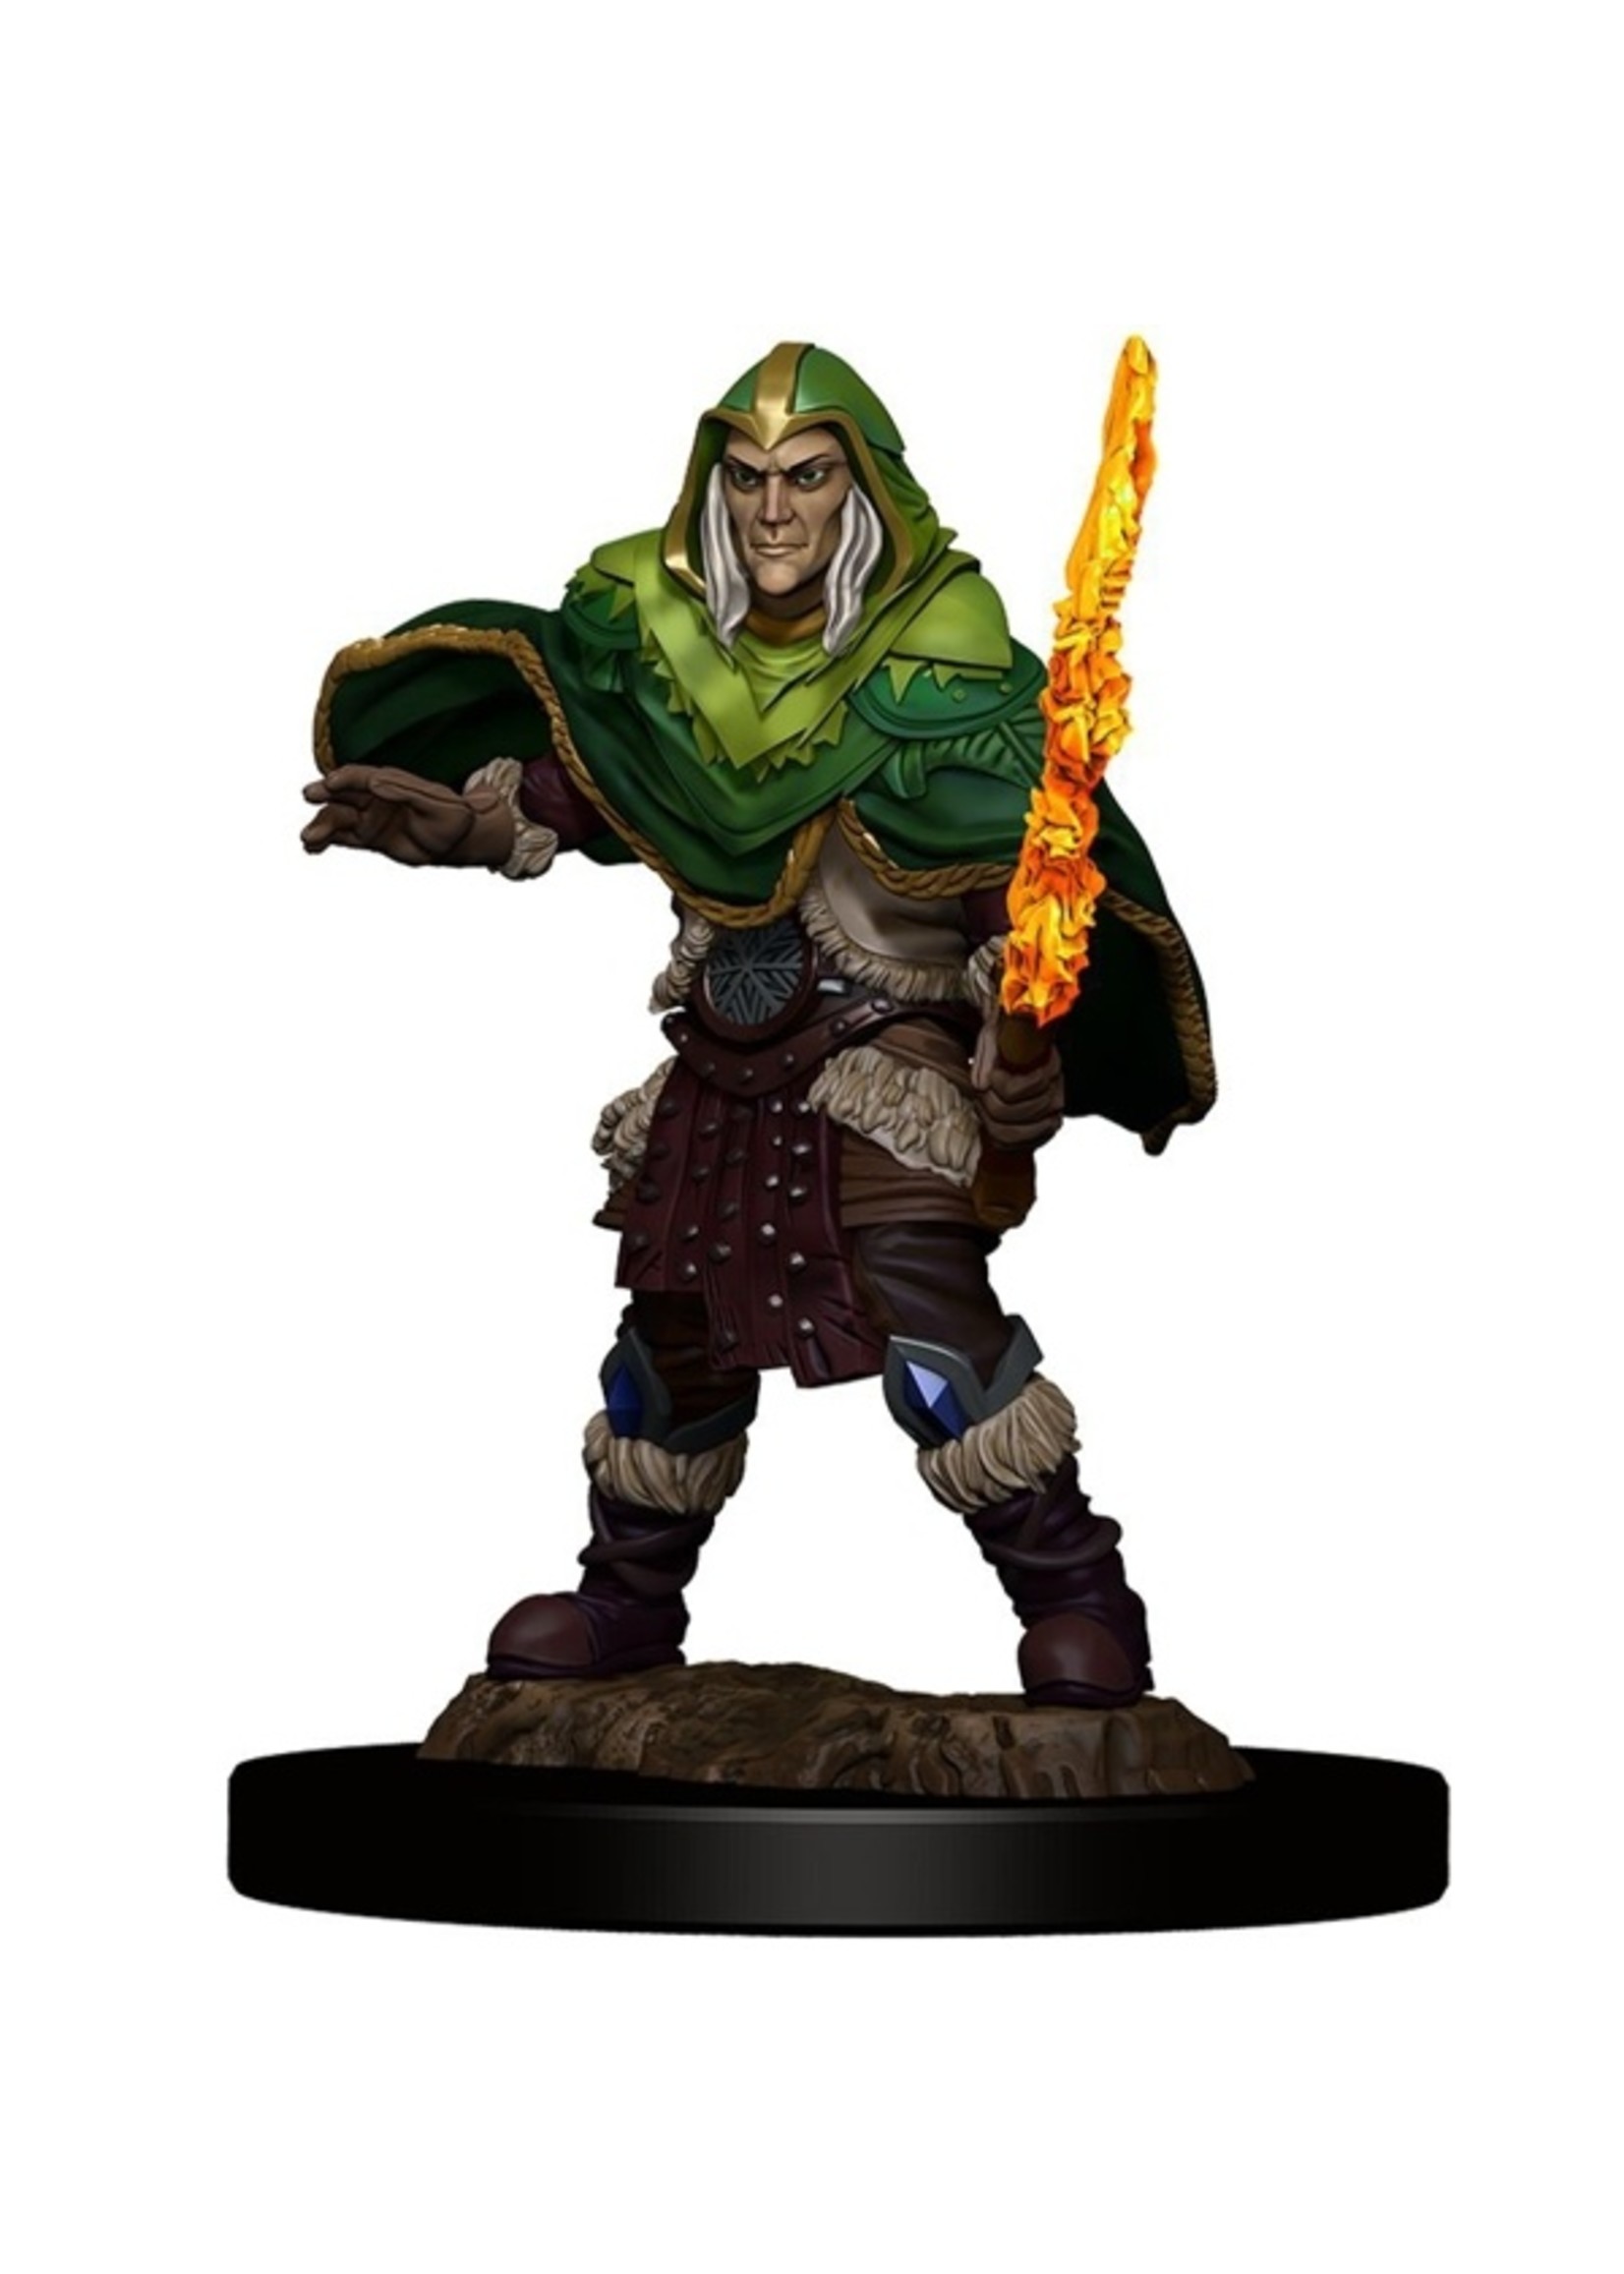 Dungeons & Dragons 5e D&D IOTR Wave 5 Elf Fighter Male